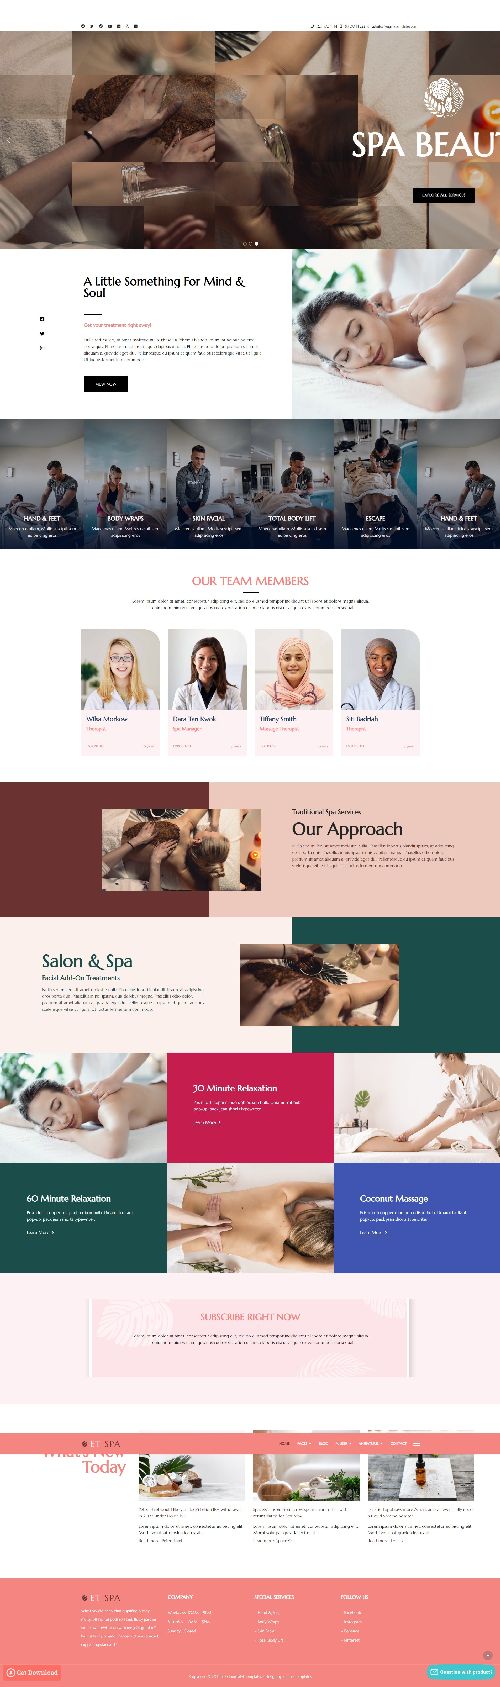 Spa - Responsive Spa and Beauty Centers Joomla 4 template